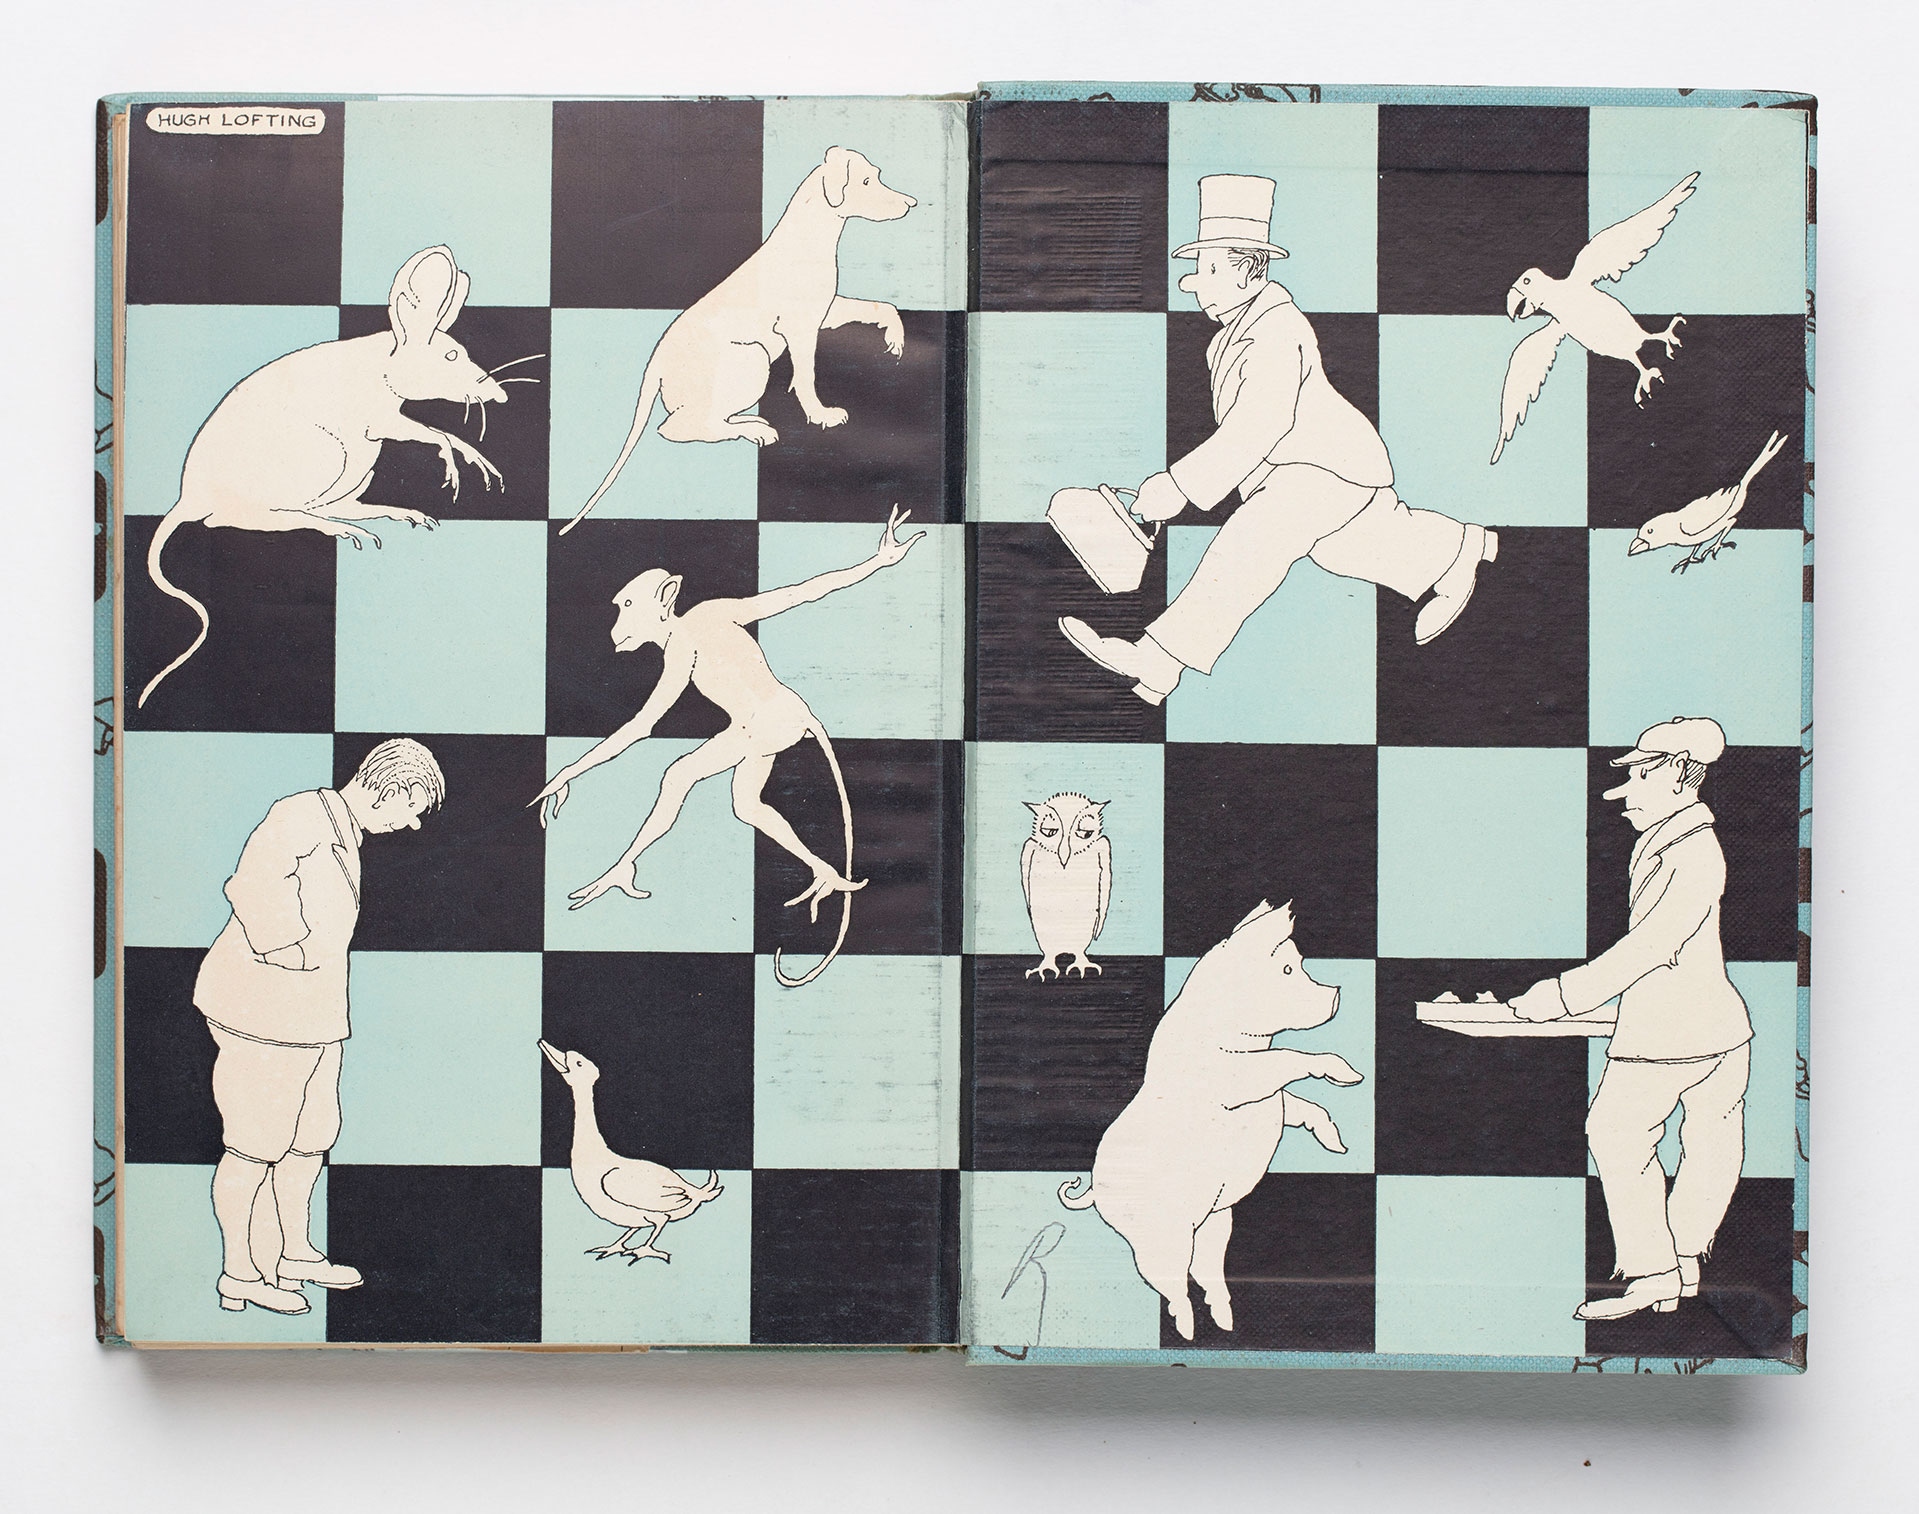 Endpapers illustrating Dr Dolittle on a checquered background.